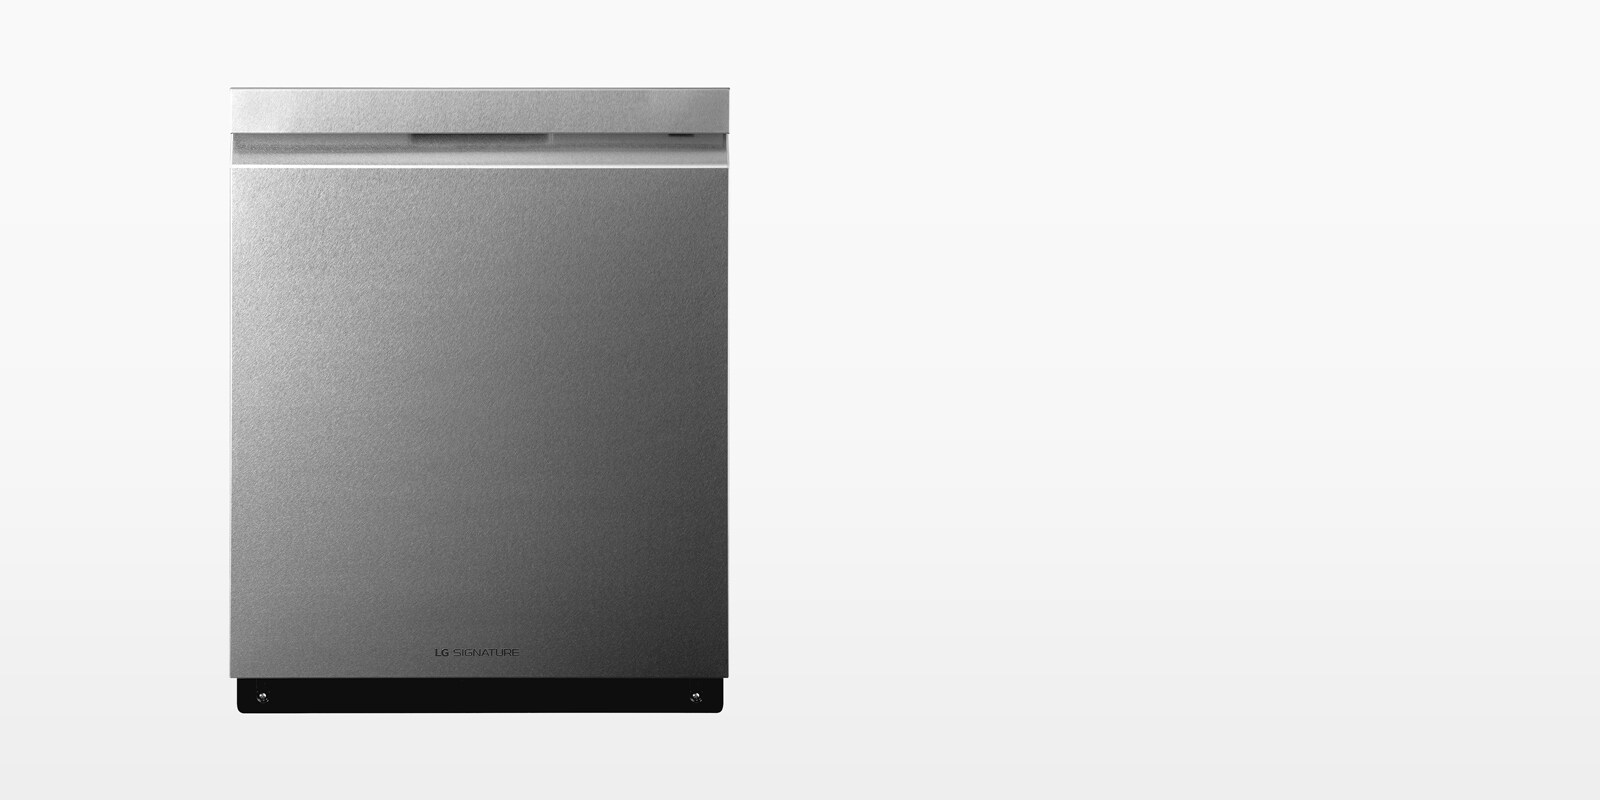 Detailed cut that LG SIGNATURE Dishwasher’s textured steel finish